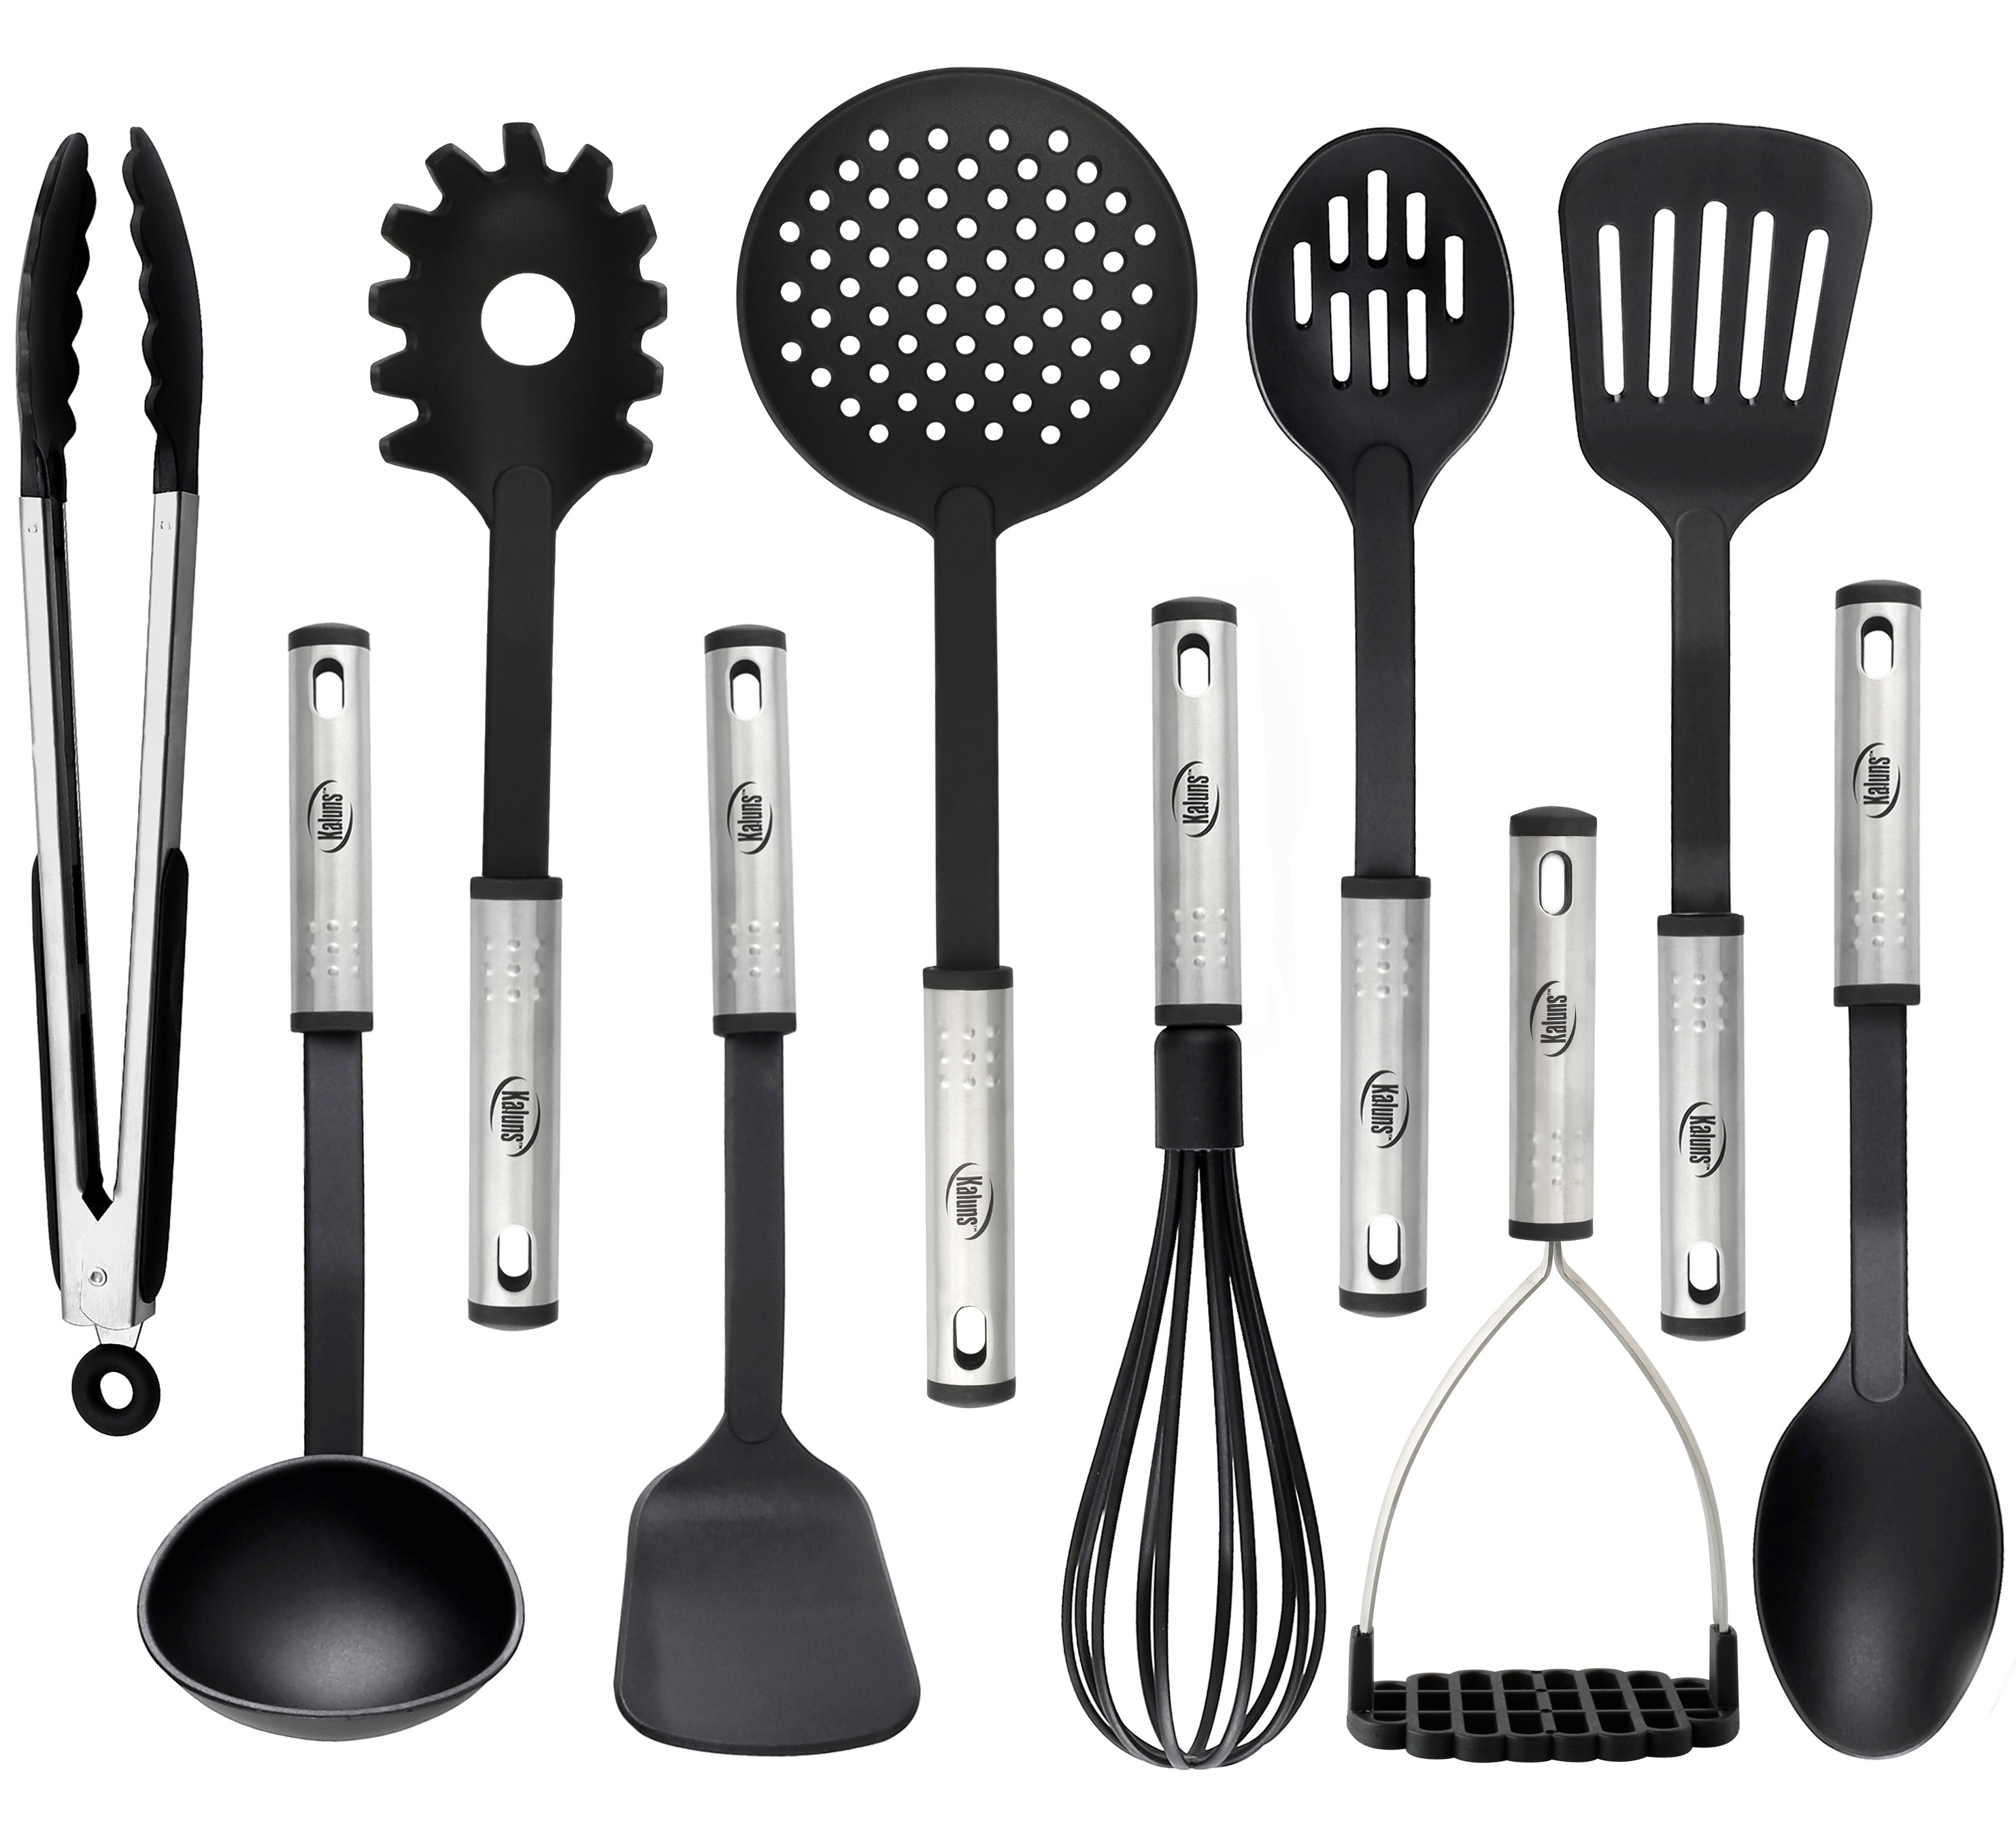 Kaluns Kitchen Utensils Set, 24 Piece Nylon and Stainless Steel Cooking  Utensils, Dishwasher Safe and Heat Resistant Kitchen Tools, Multi